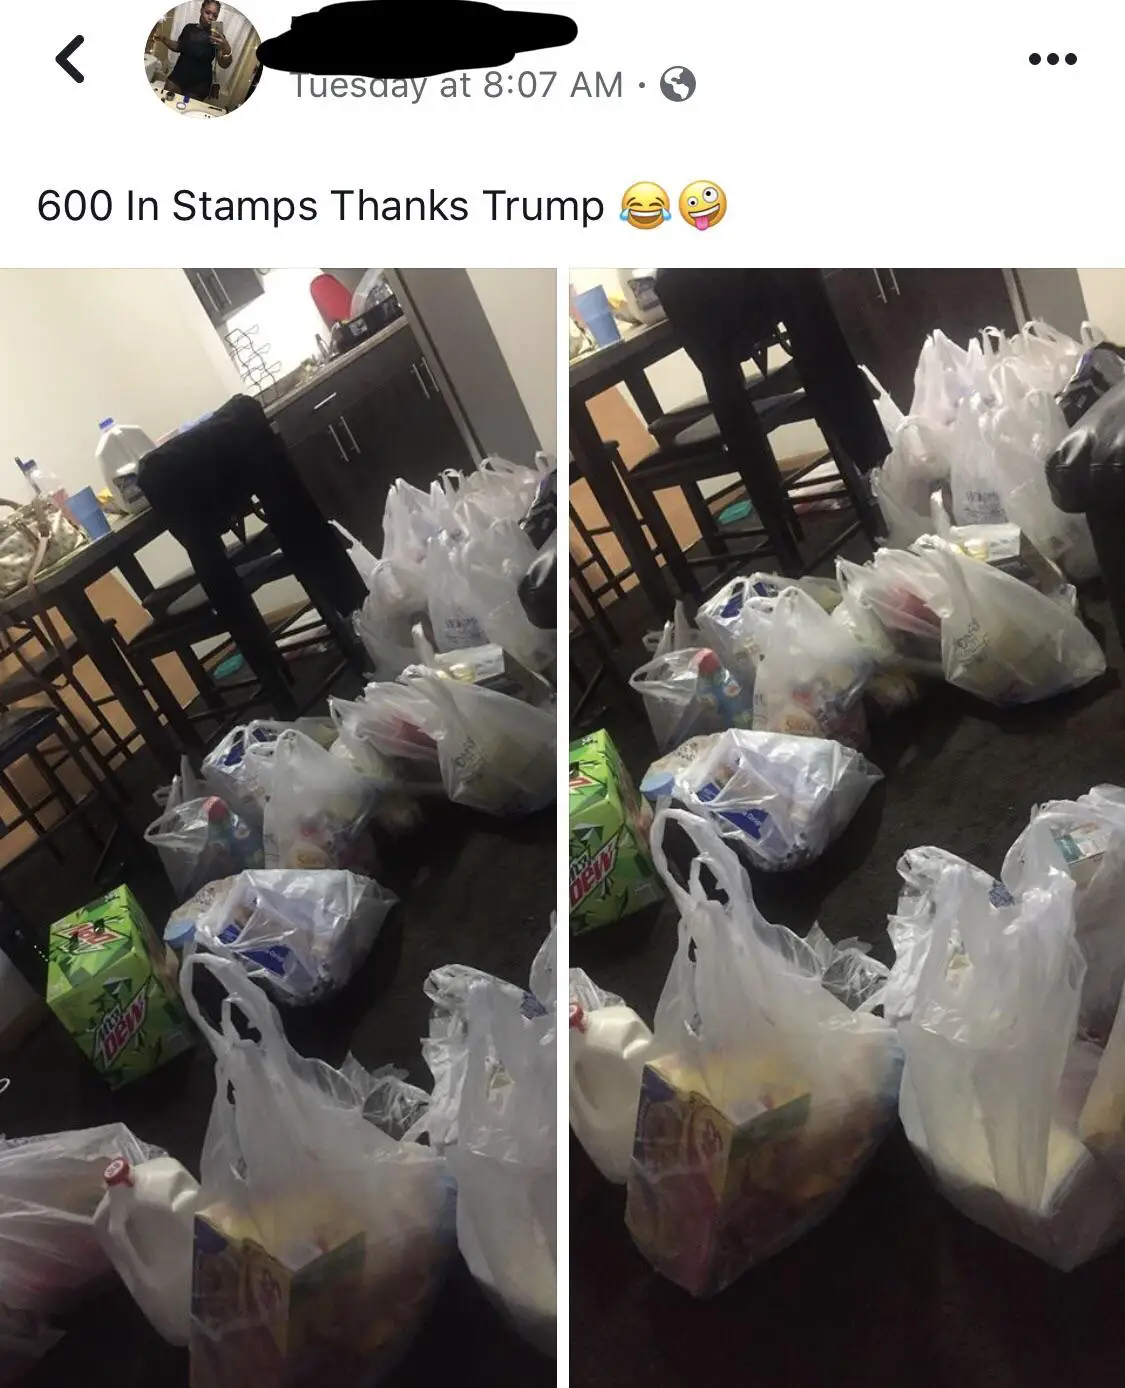 Having food stamps not trashy, bragging about them is a whole different ...